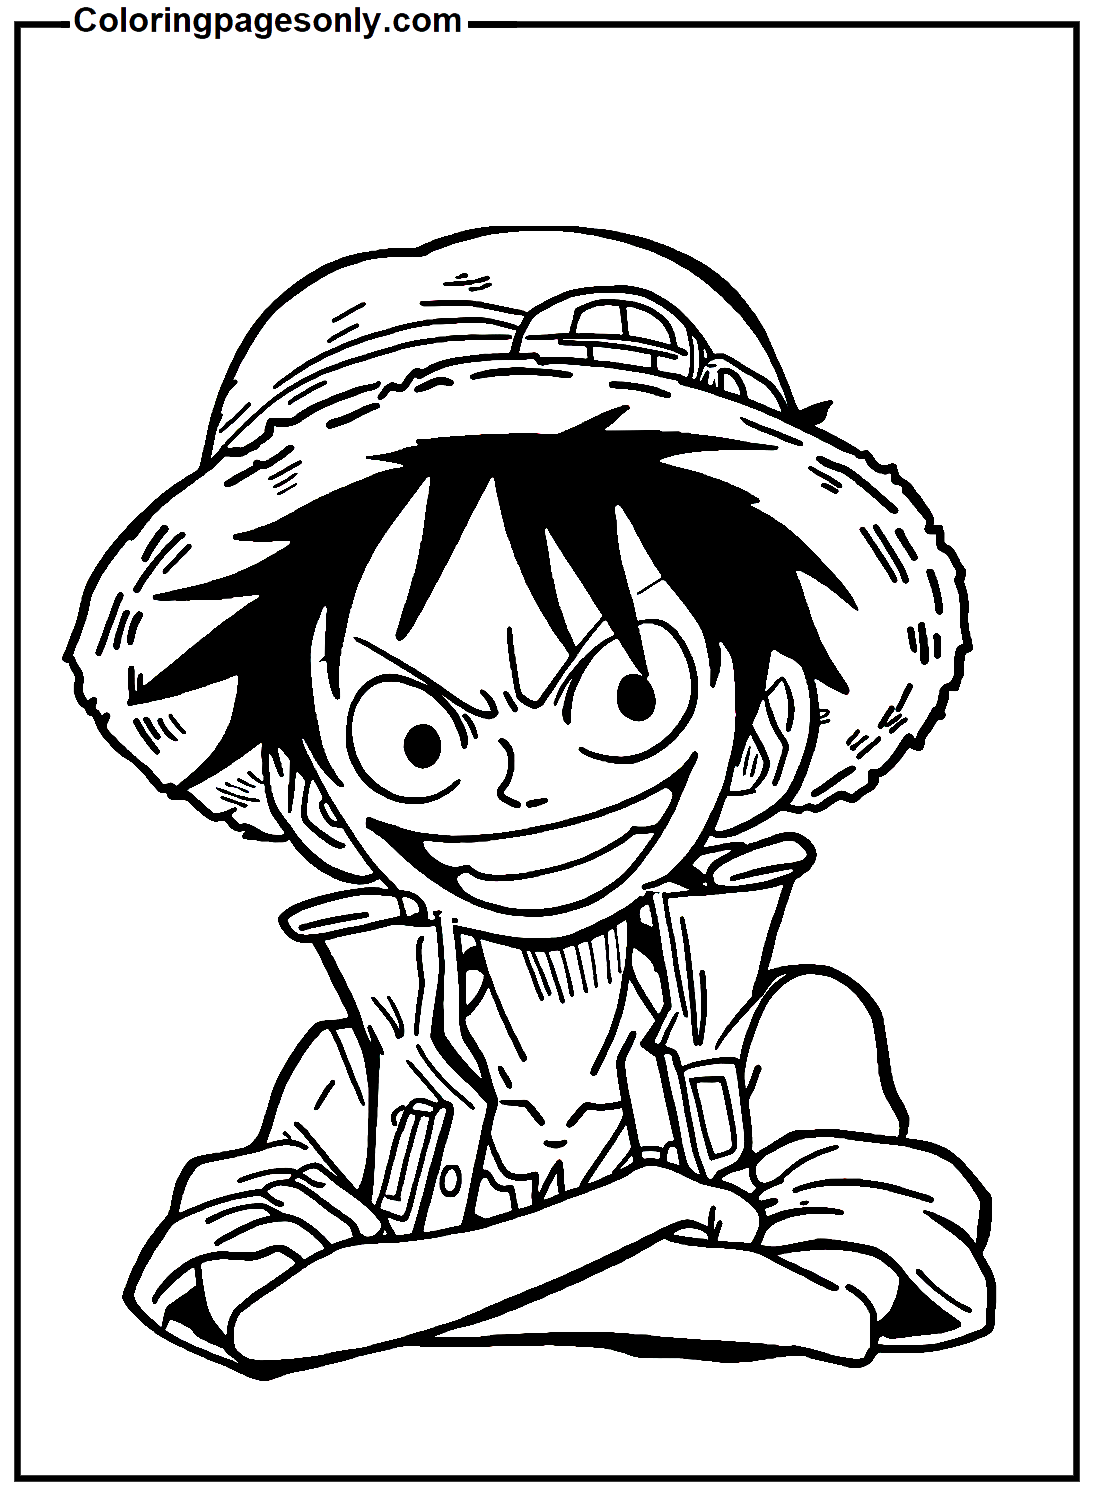 Happy Luffy from Luffy